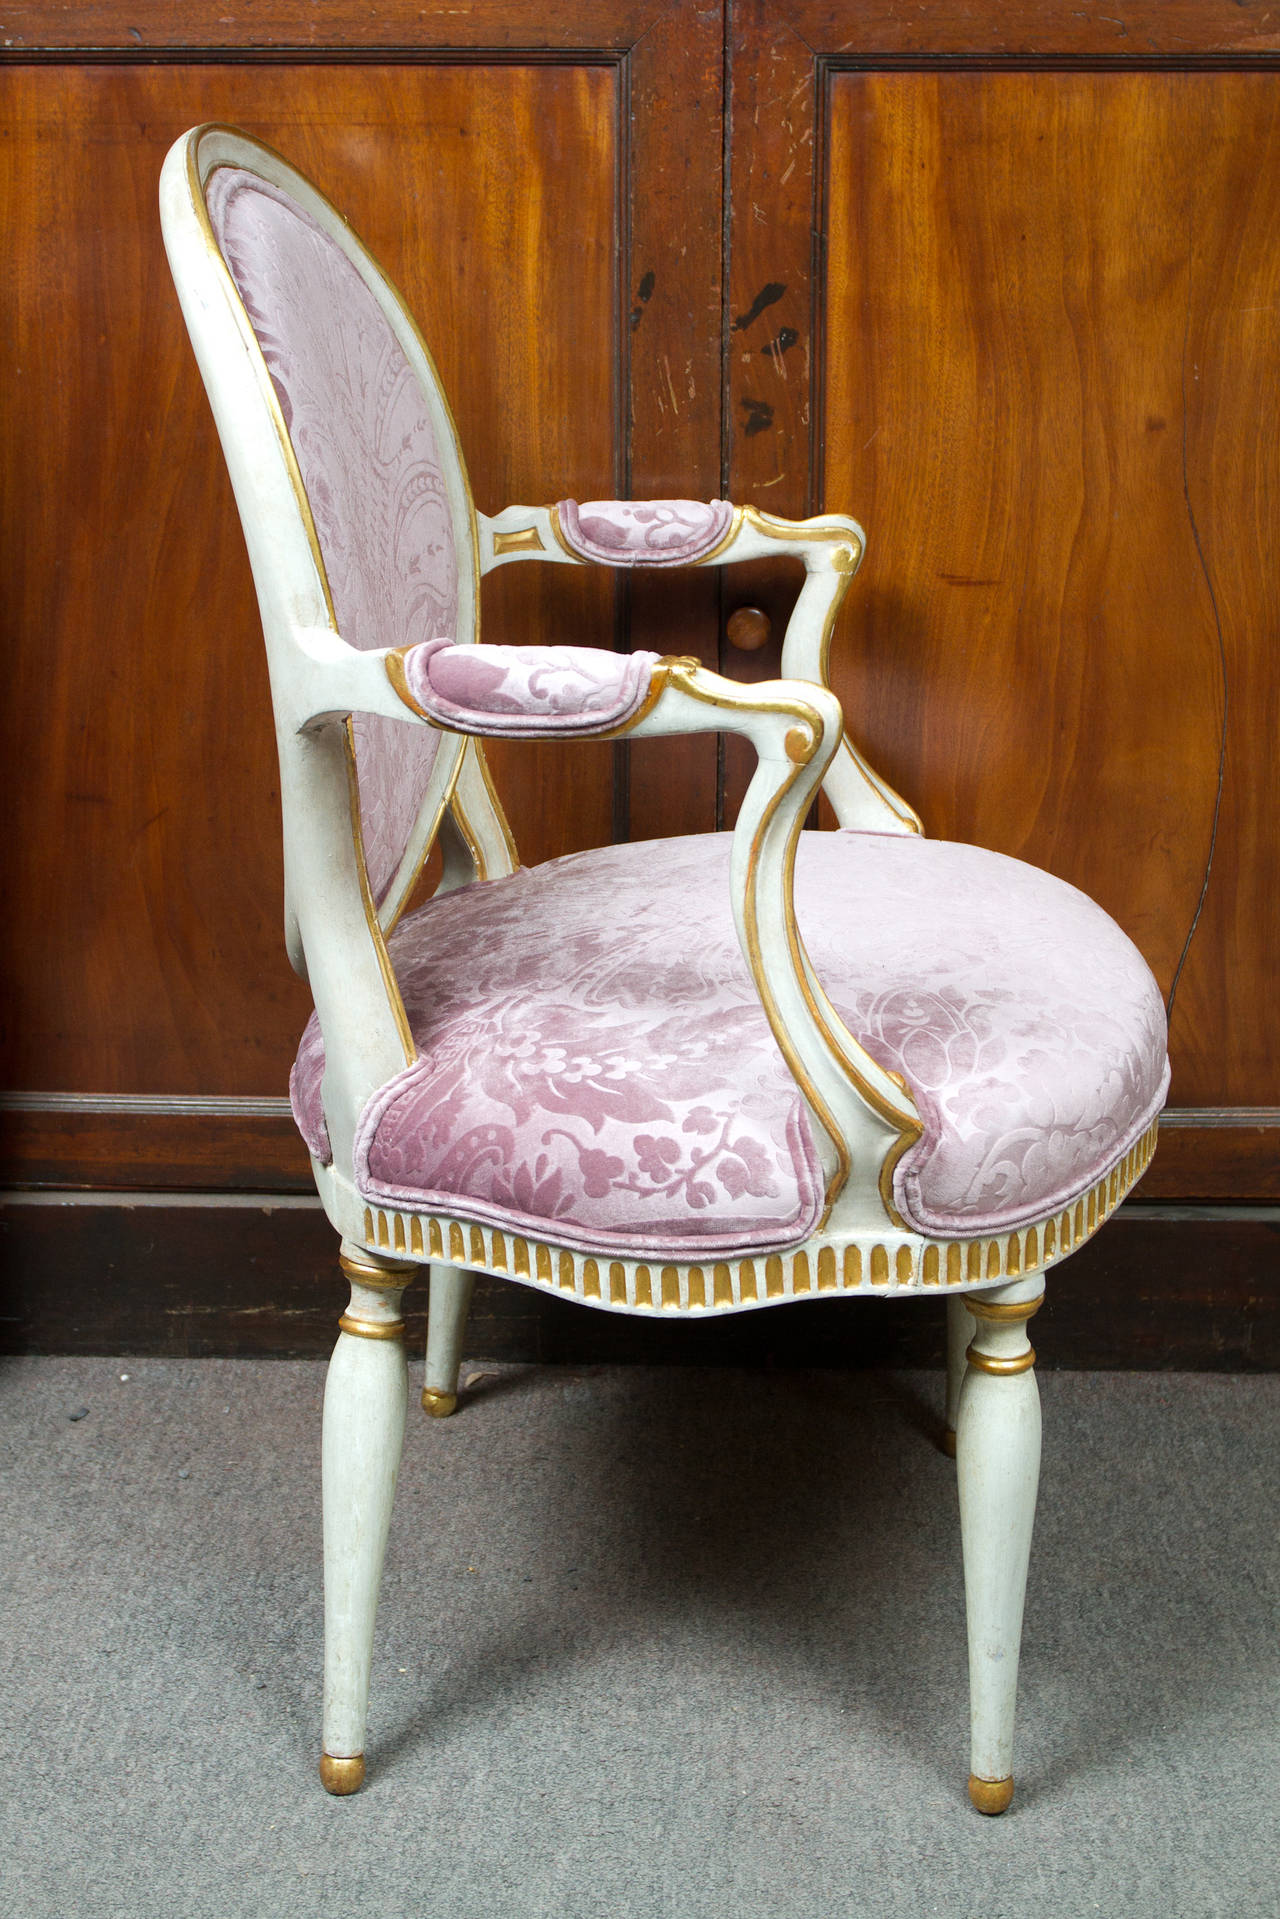 Pair of Italian white painted and parcel-gilt neoclassical style armchairs upholstered in stamped damask style textured mauve velvet.